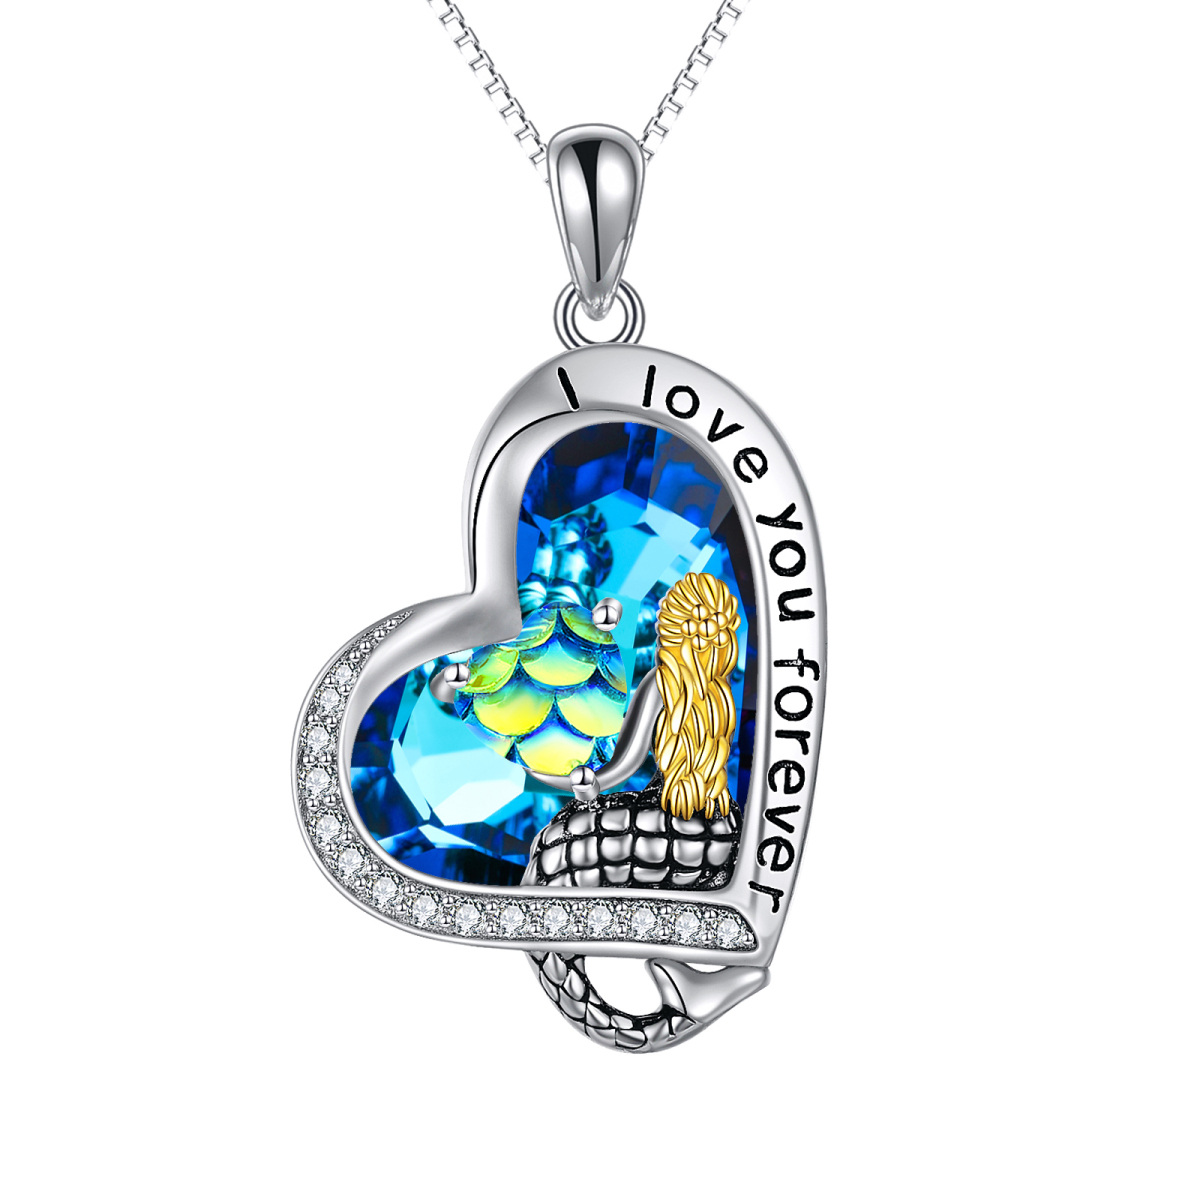 Sterling Silver Two-tone Heart Crystal Mermaid Tail & Heart Pendant Necklace with Engraved Word-1